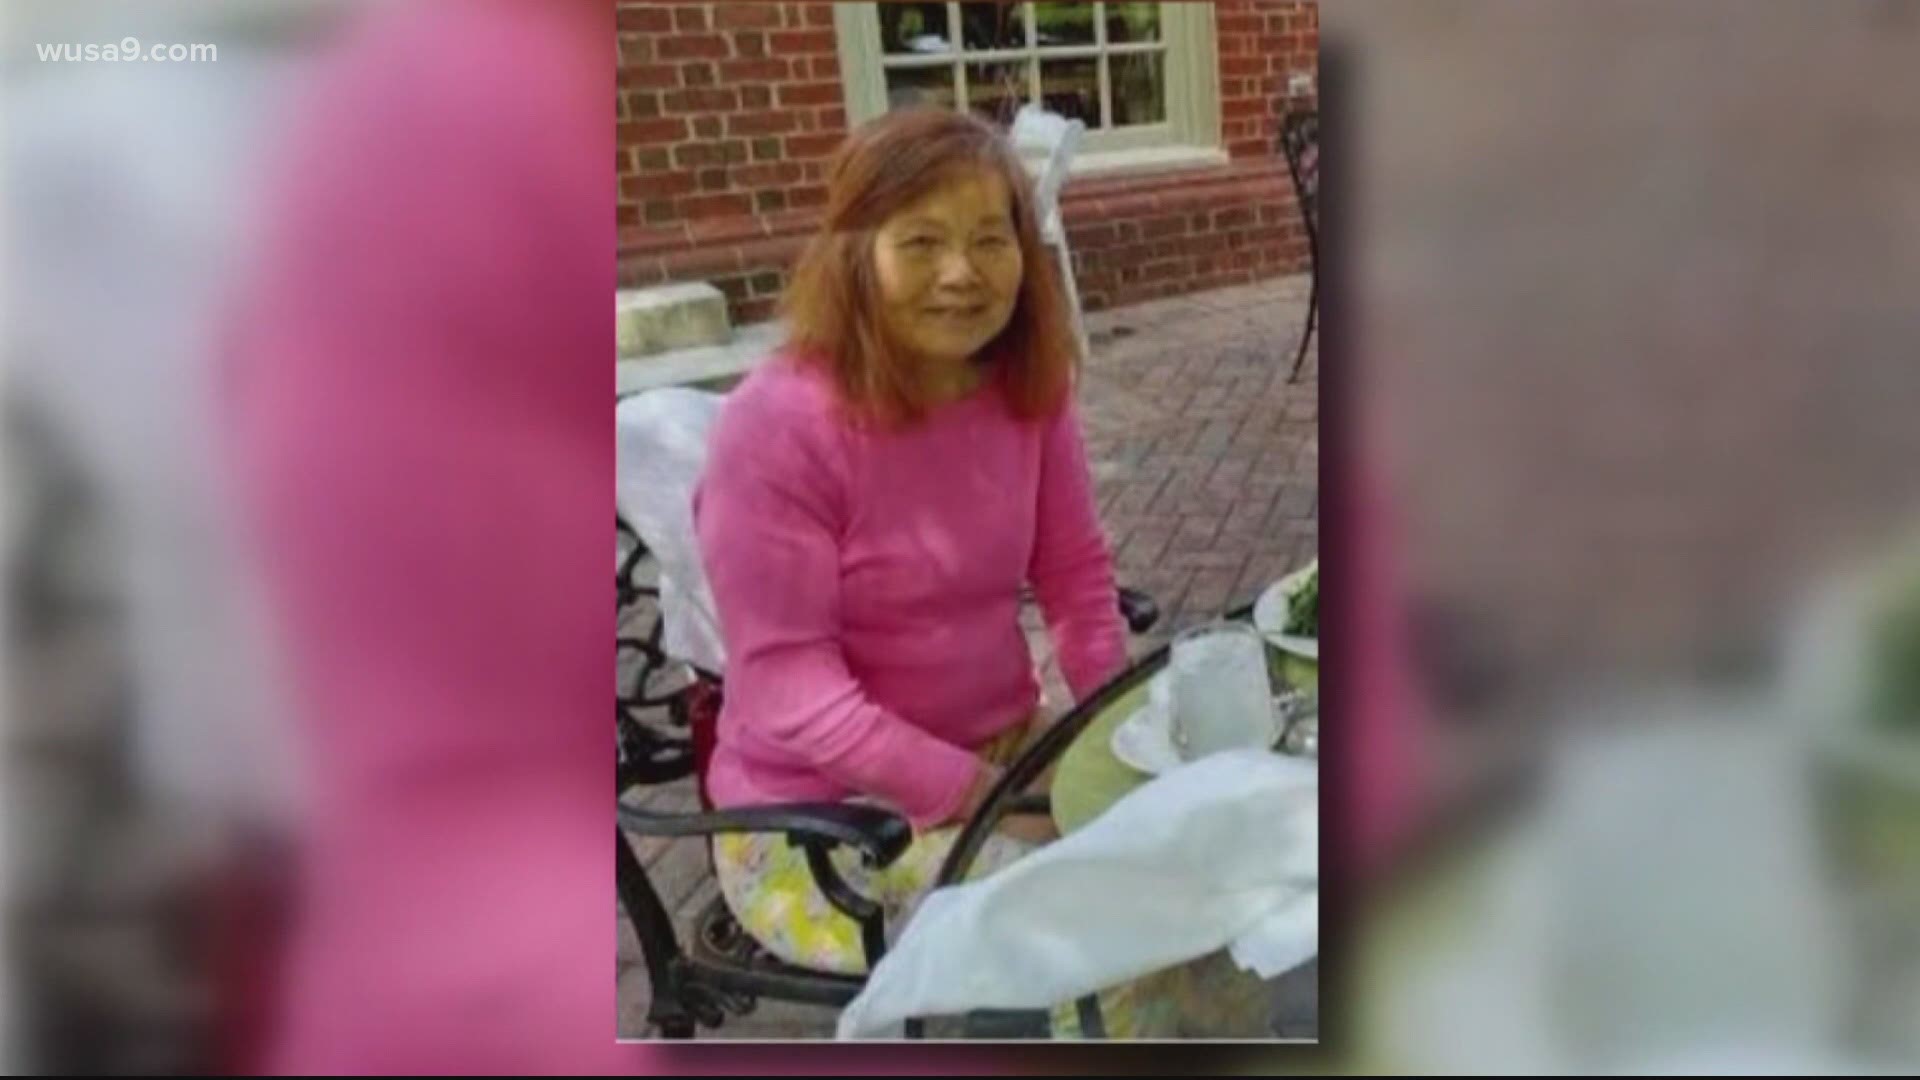 Fairfax County Police Department has identified a man as a person of interest in the "suspicious" disappearance of 72-year-old Emily Lu, who was last seen on June 3.